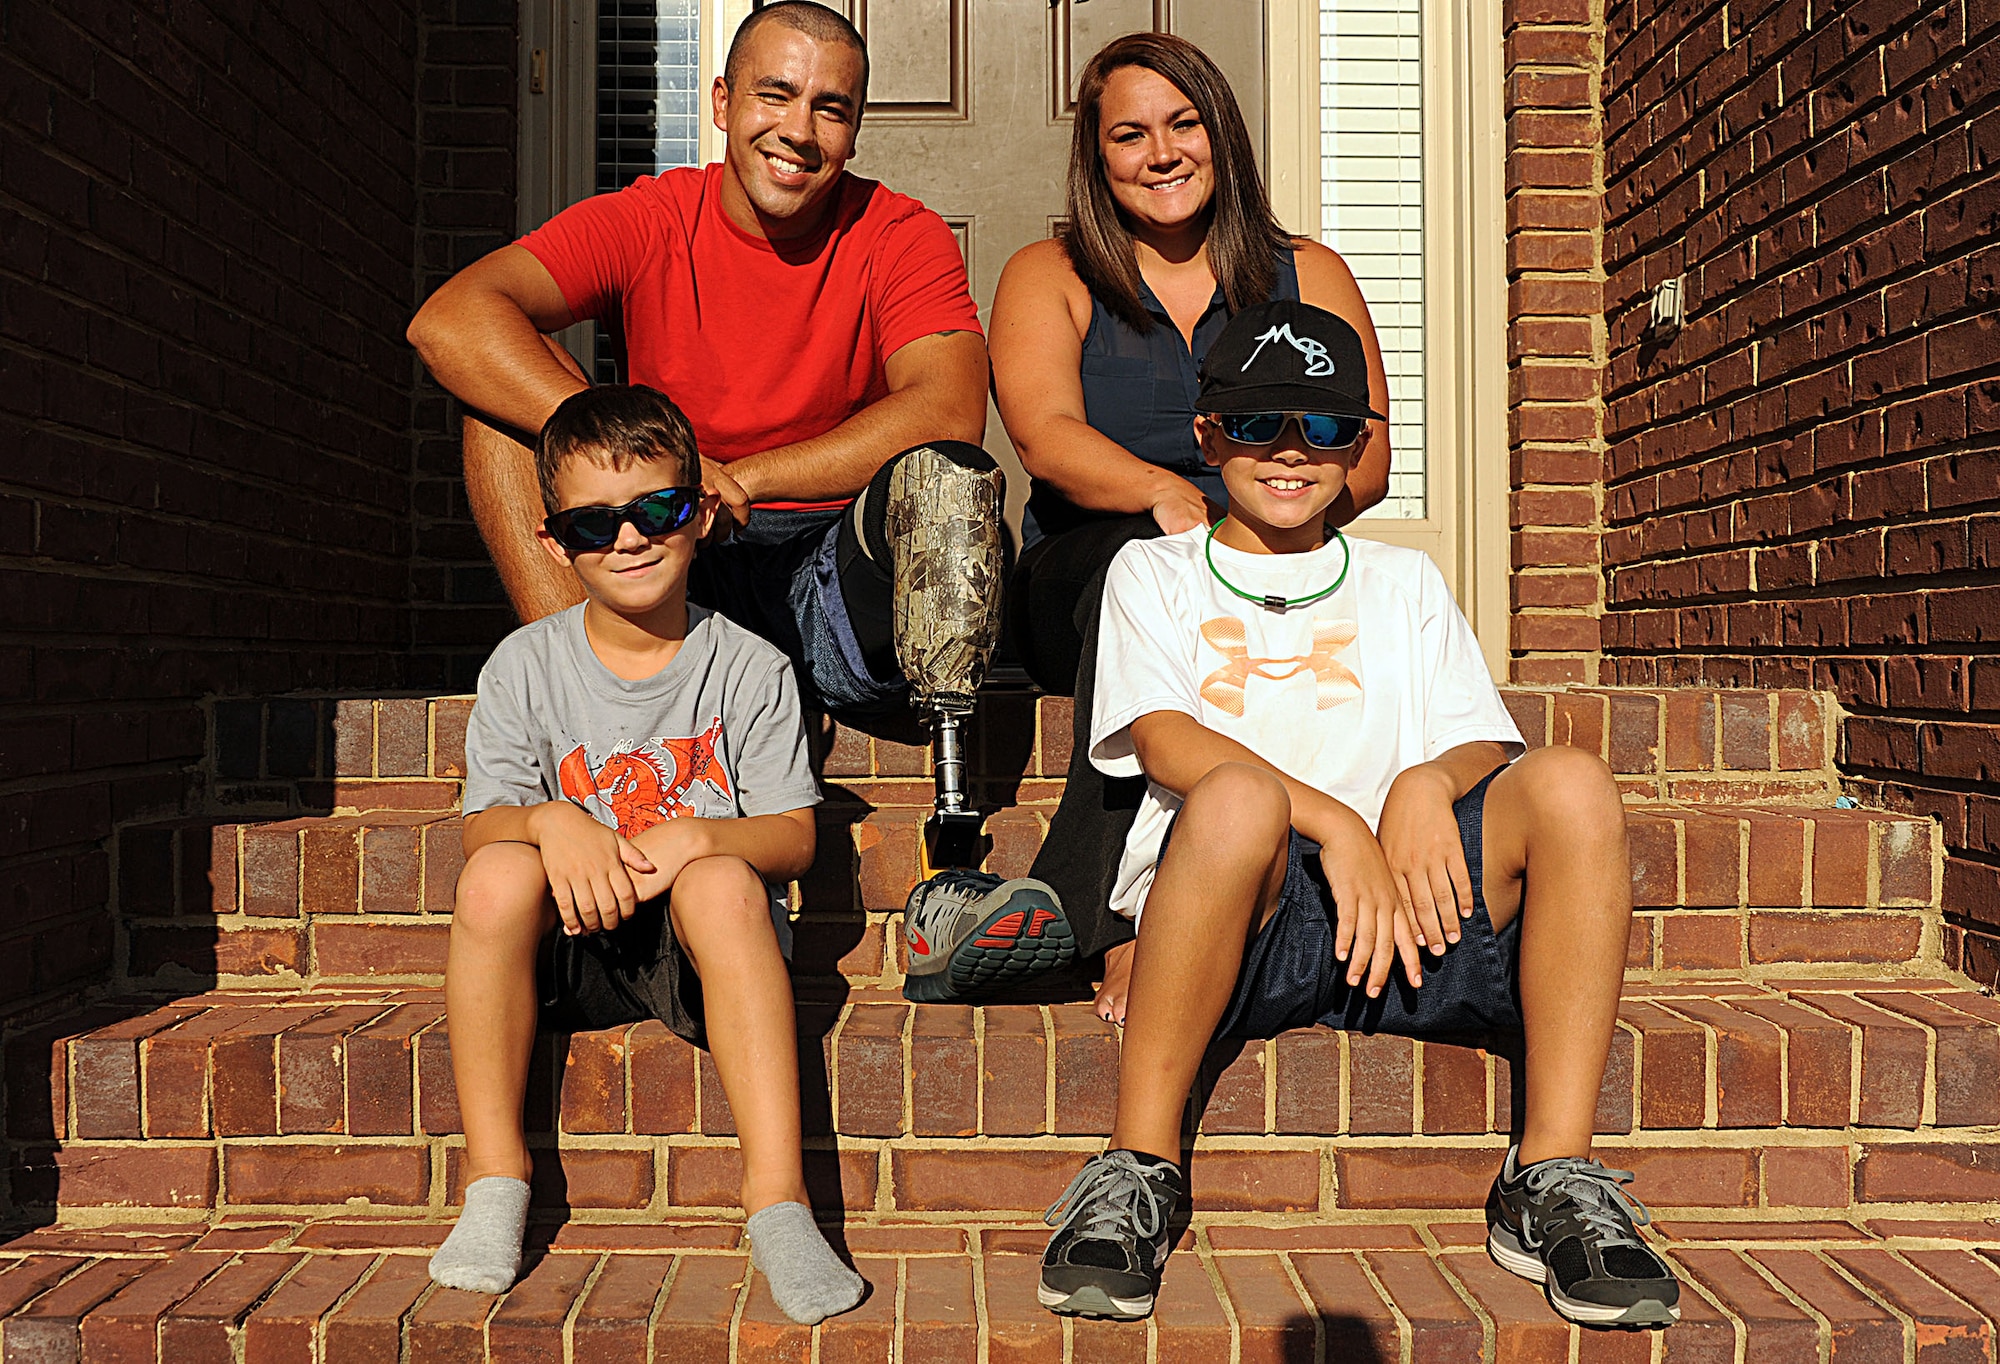 Staff Sgt. Rey Edenfield poses with his wife, Amy, and their two sons, Grayson, left, and Dawson on the front porch of their home Aug. 28, 2014. The picture was taken almost a year after Edenfield was involved in a motorcycle accident that resulted in his left leg being amputated six inches below the knee. Edenfield is an air traffic controller at Maxwell Air Force Base, Ala. (U.S. Air Force photo/Staff Sgt. Erica Picariello) 